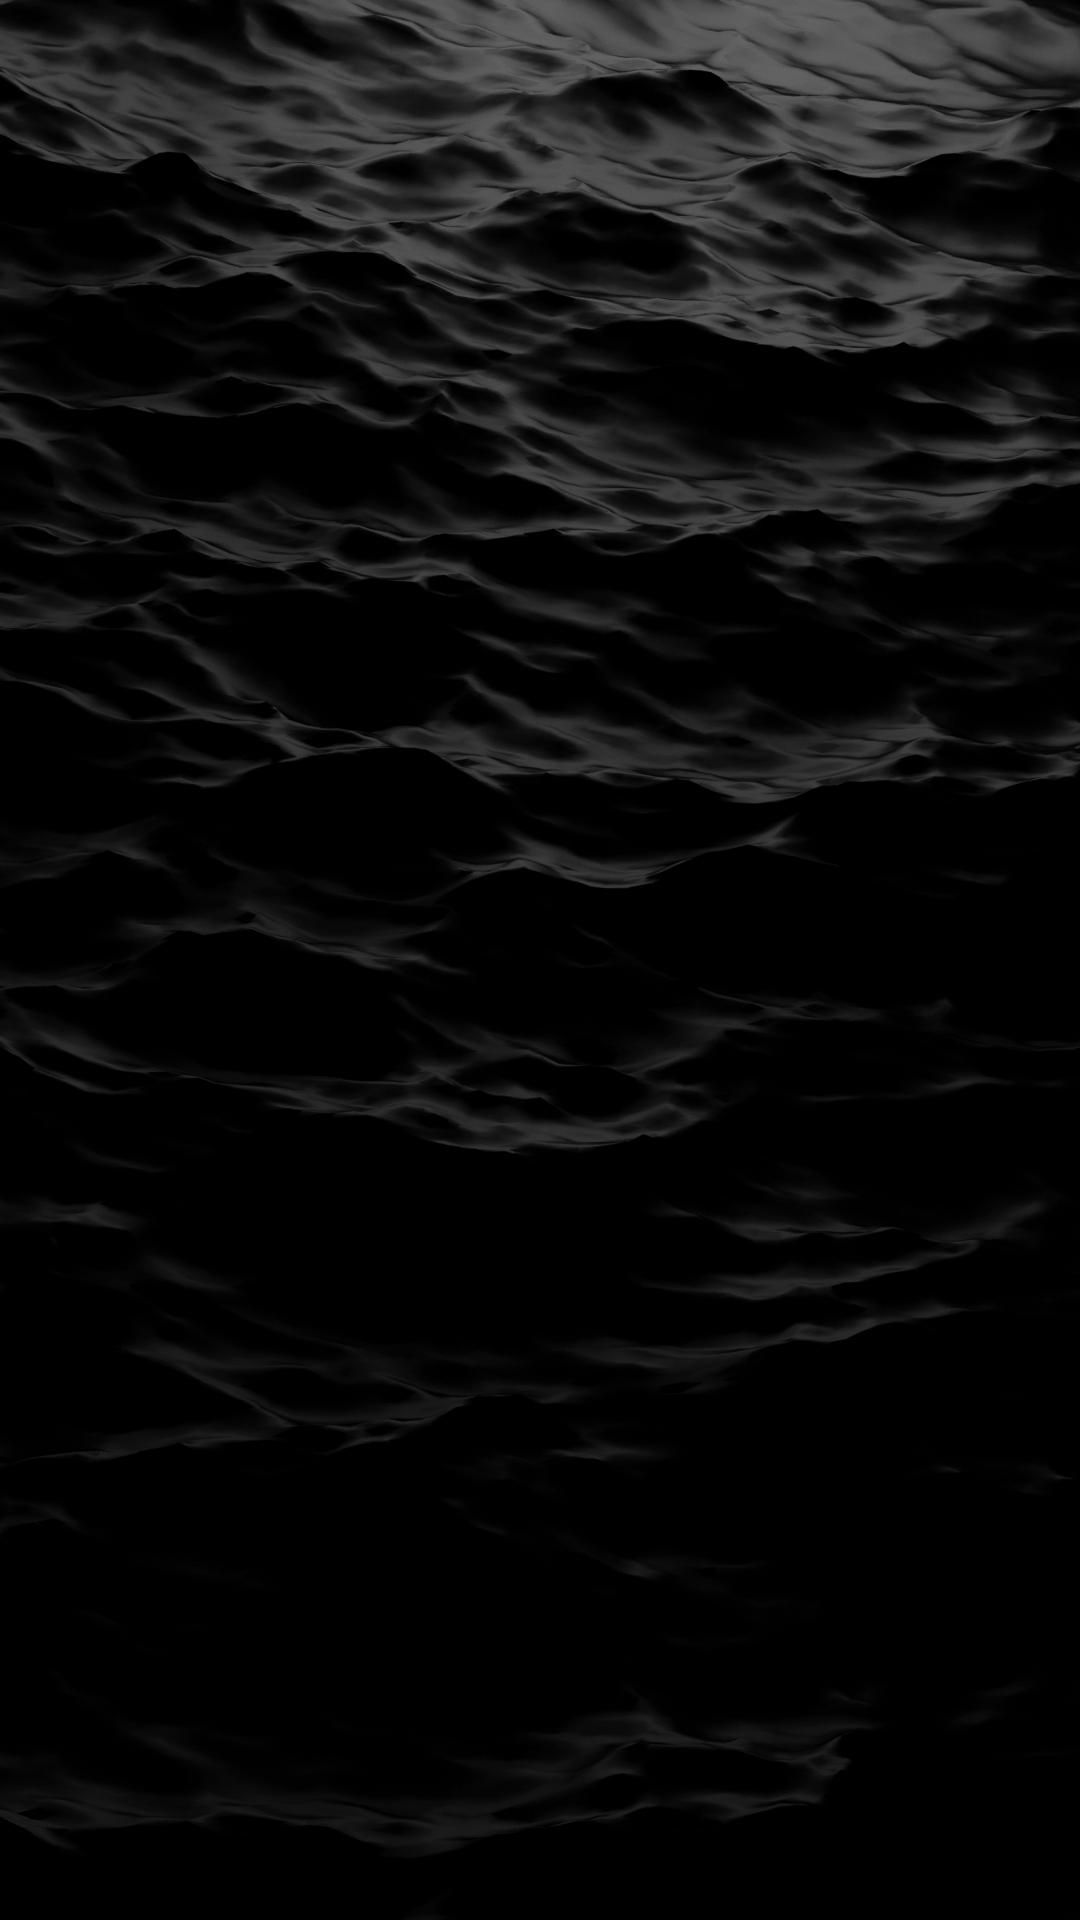 Does Anyone Have Any Pure Black Wallpaper For Amoled 7